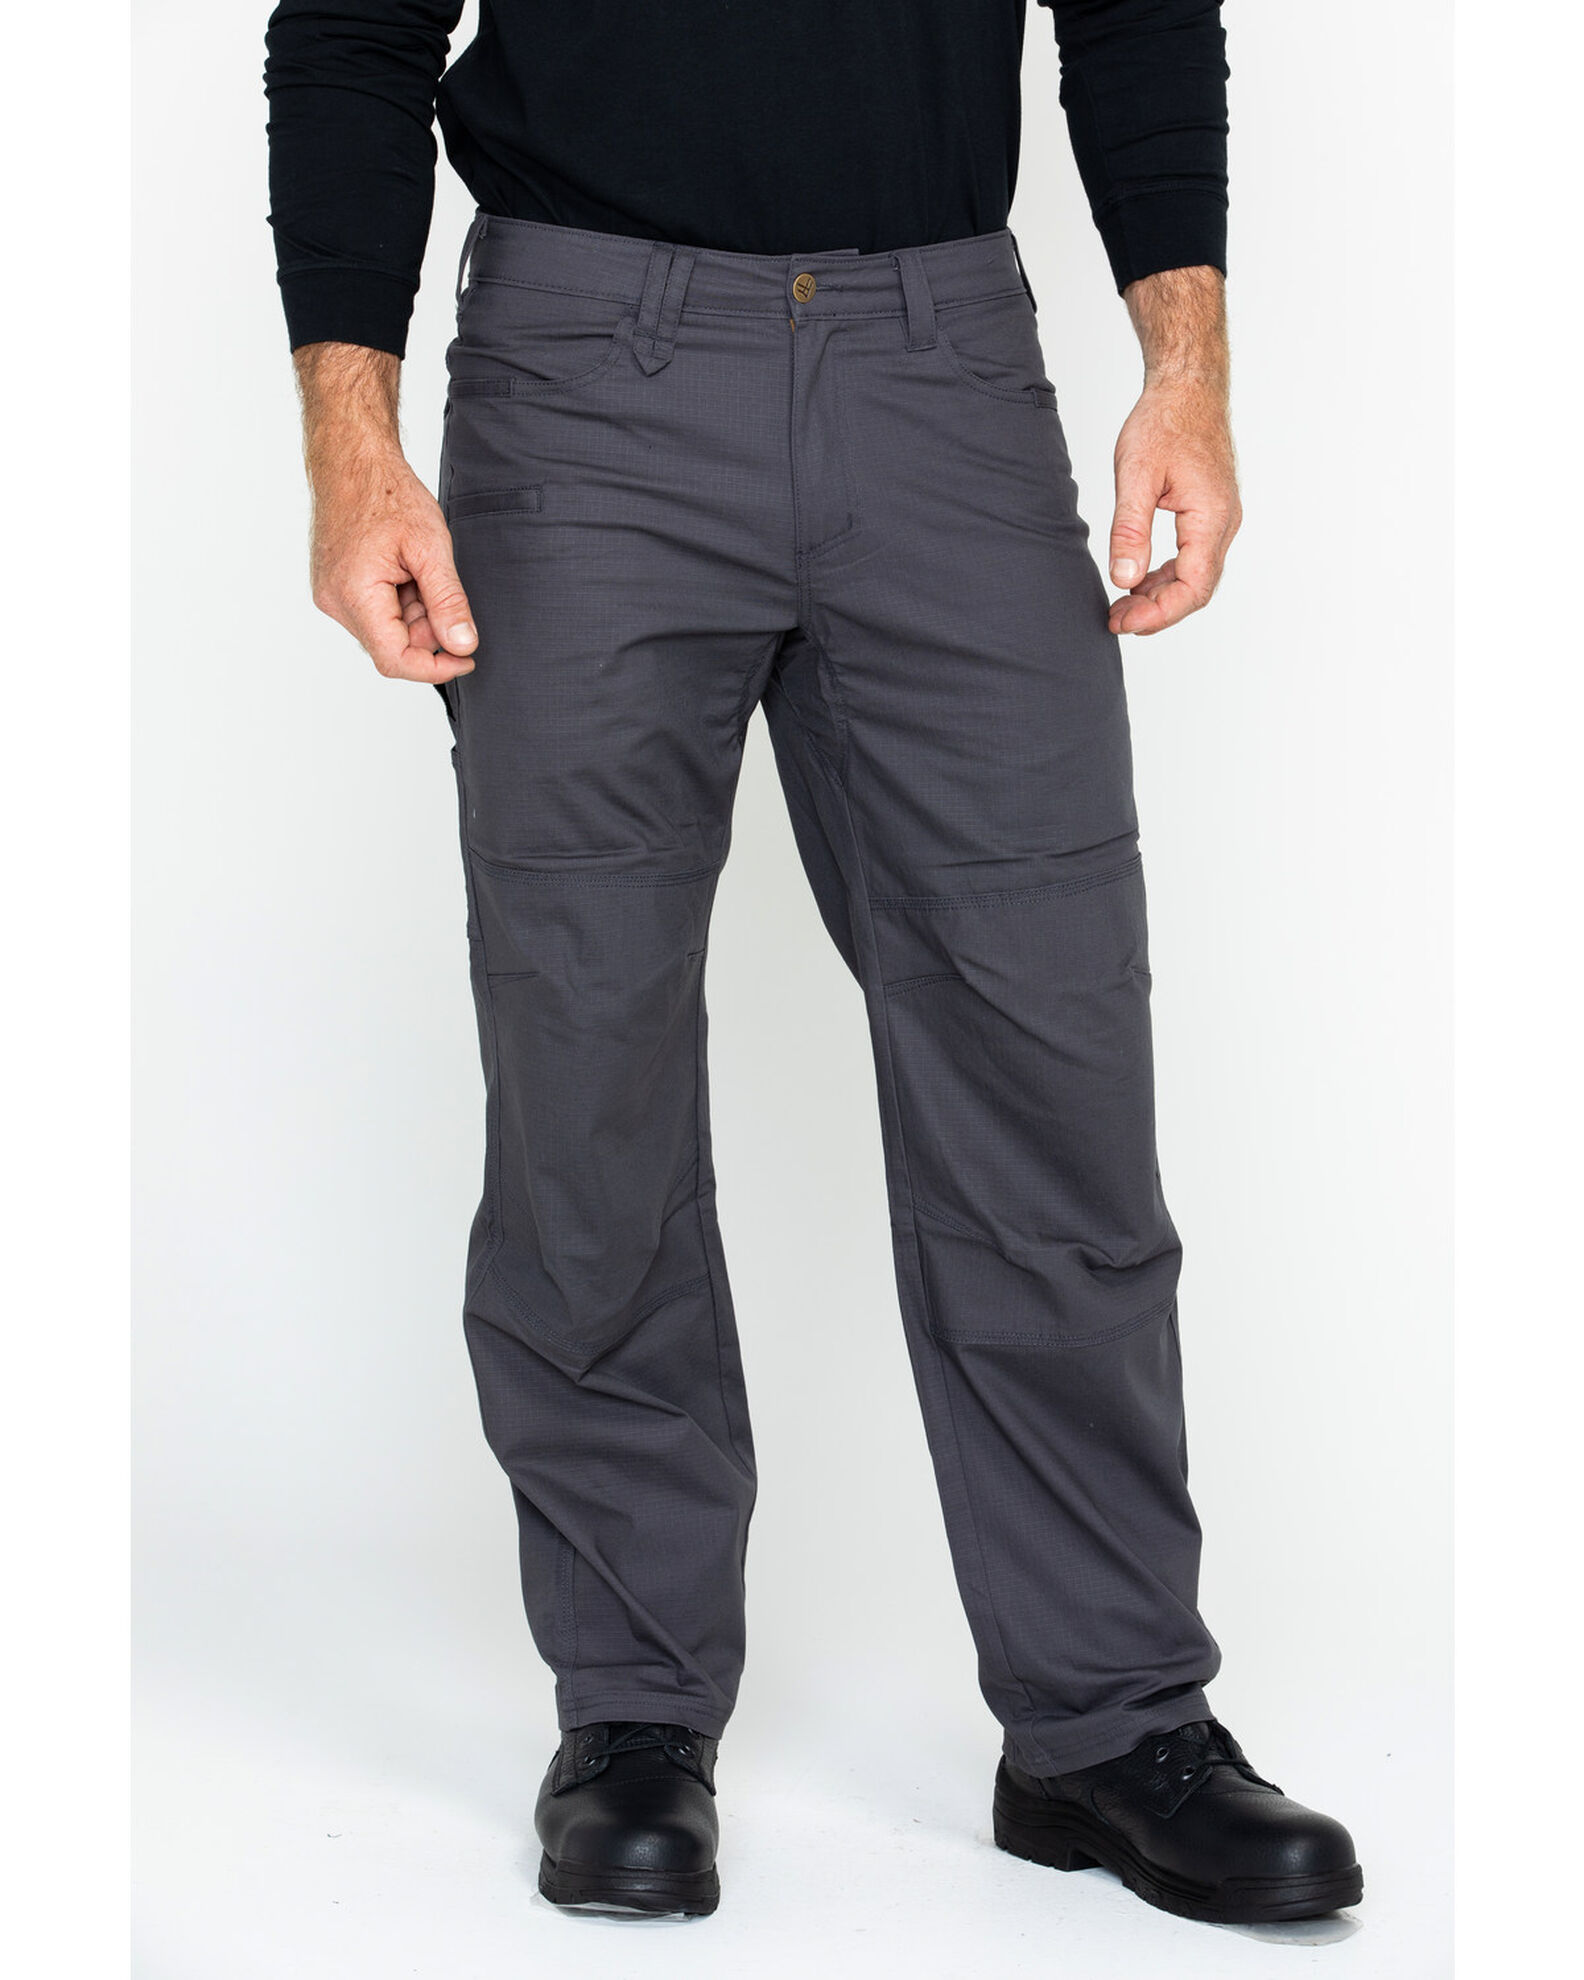 Hawx Men's Stretch Canvas Utility Work Pants - Country Outfitter